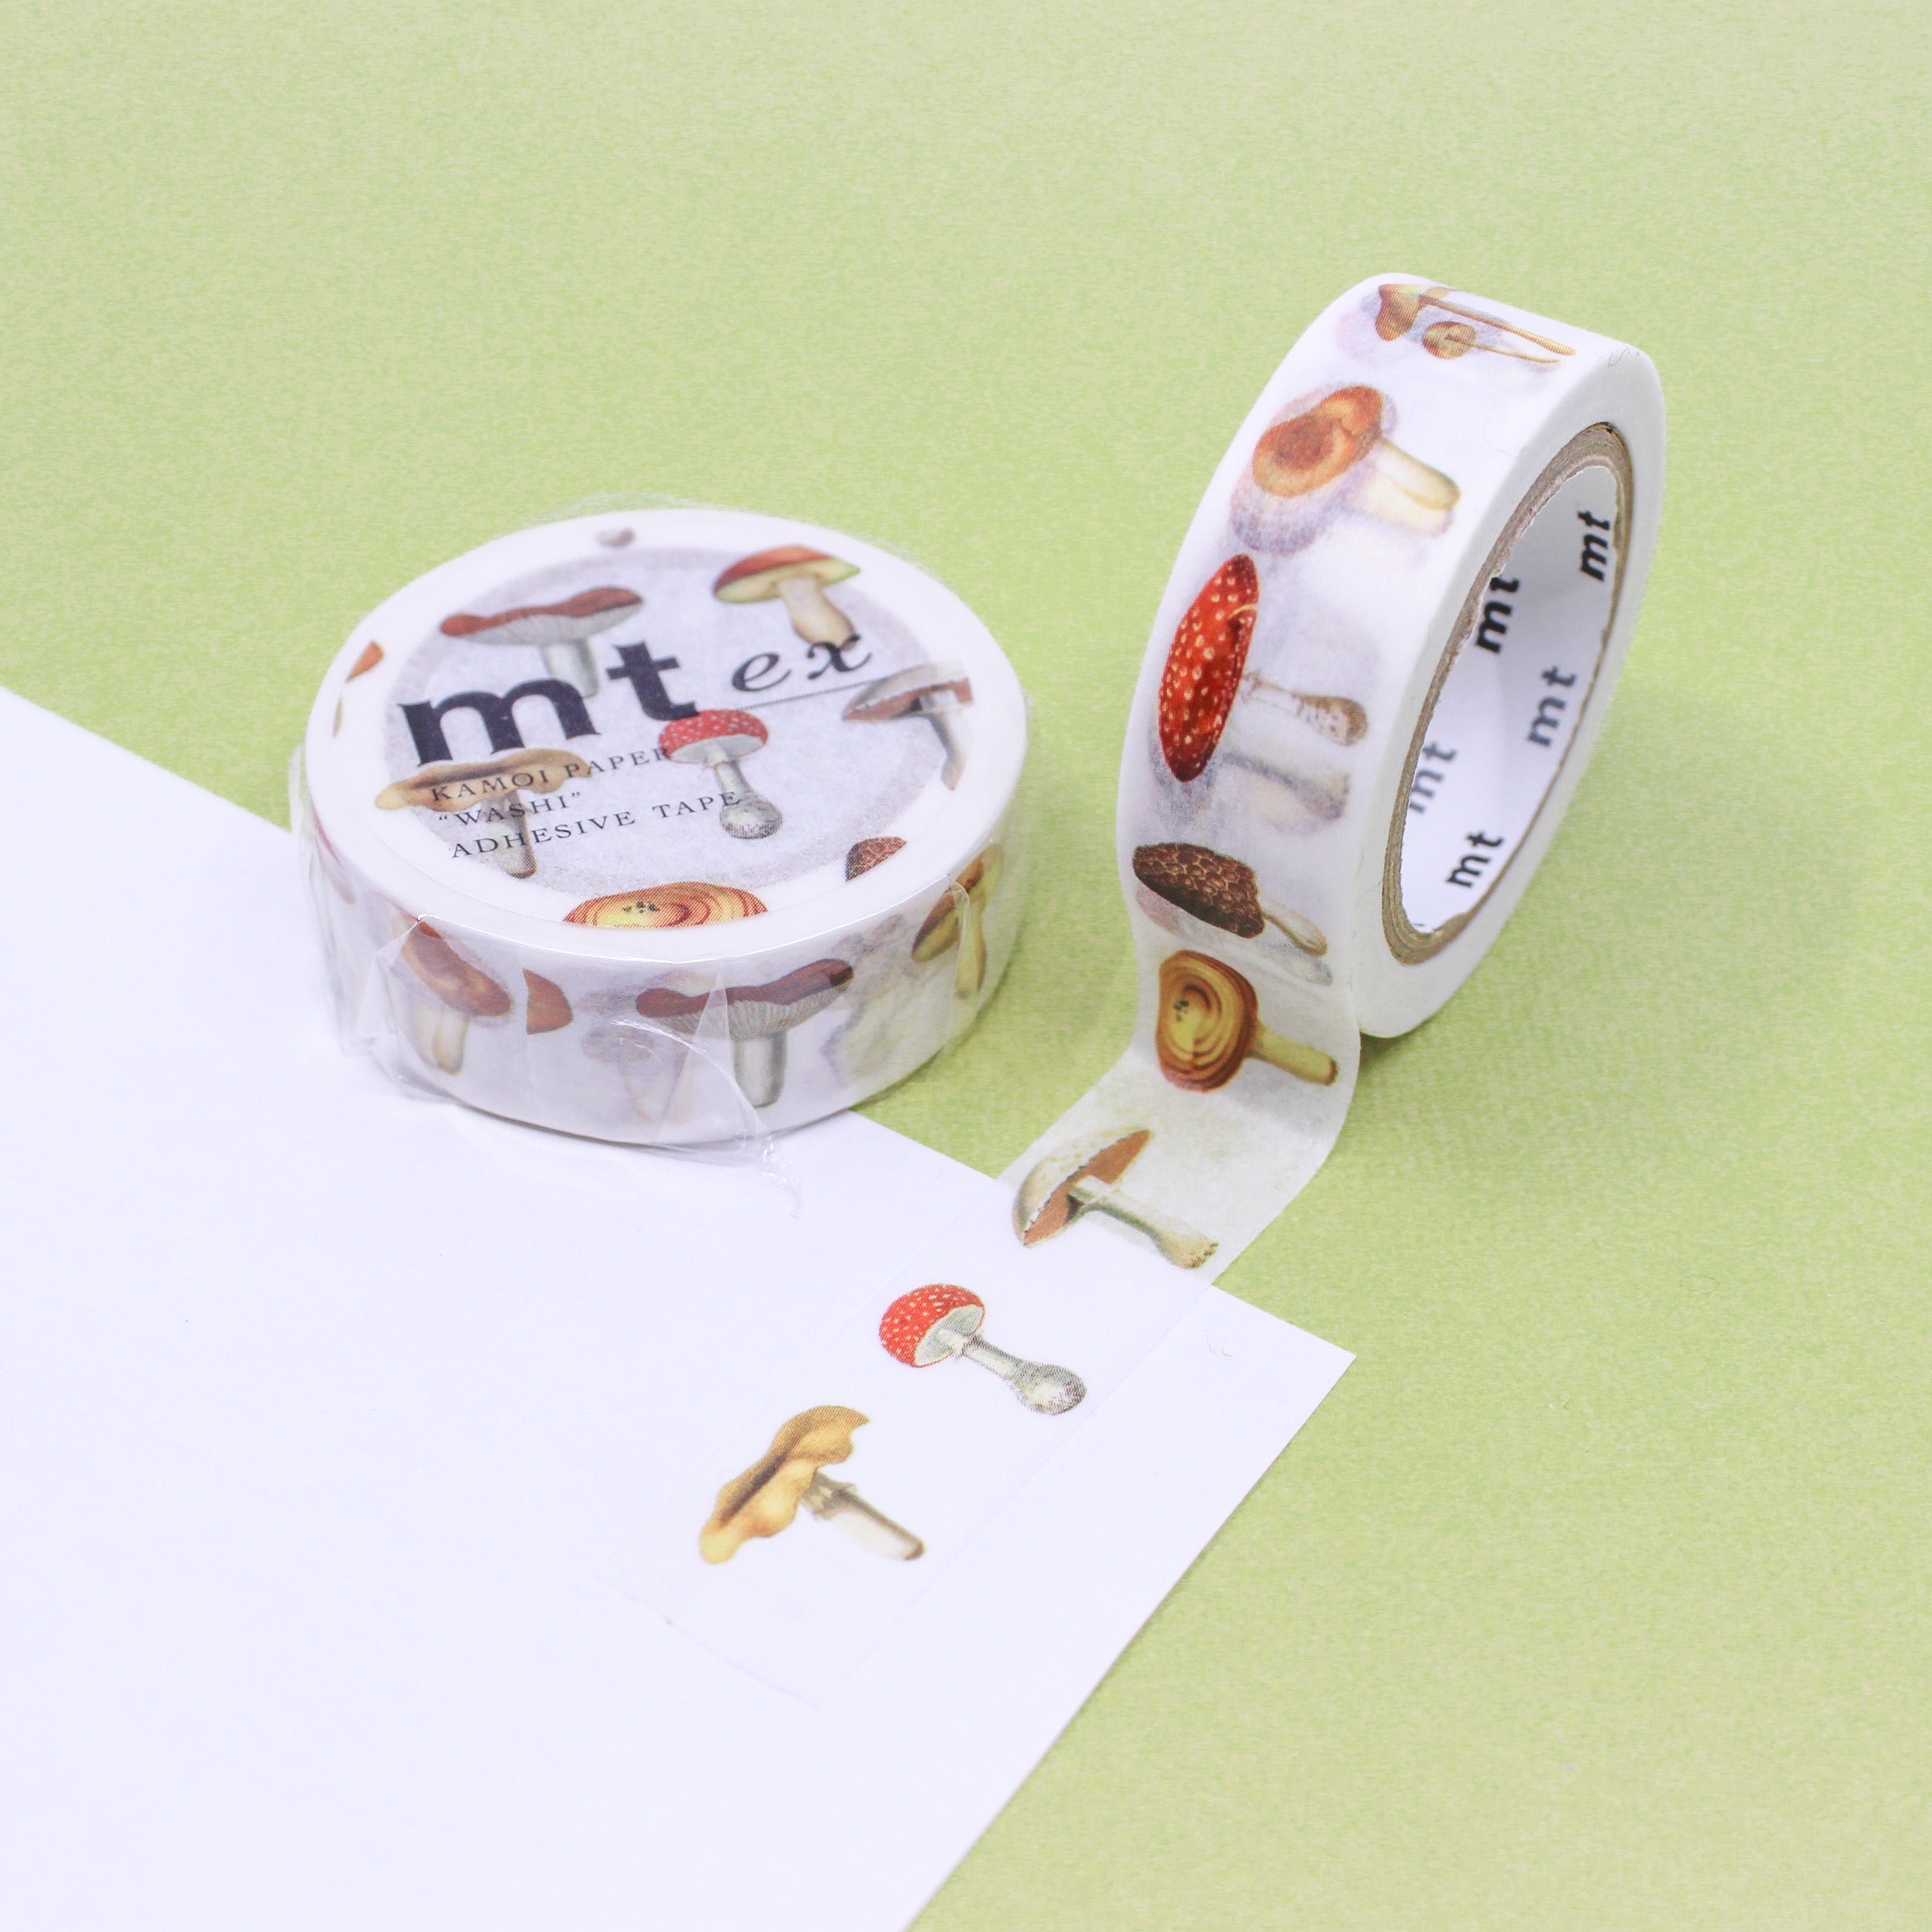 Elevate your projects with our captivating classic mushroom washi tape, showcasing delightful mushroom designs that evoke a sense of nature and simplicity. This MT Brand Washi is sold at BBB Supplies Craft Shop.